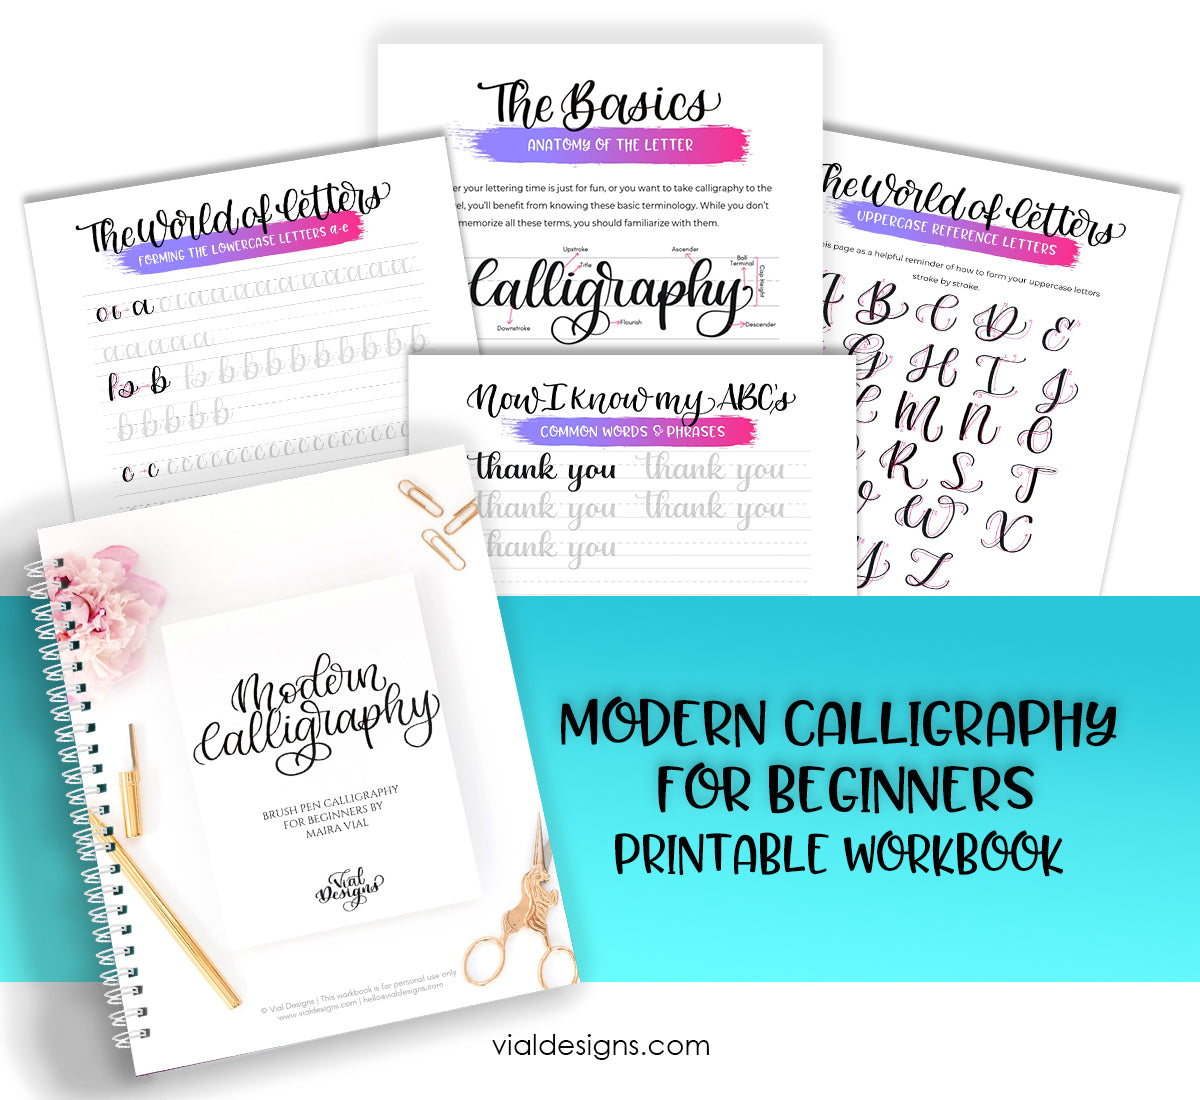 Modern Calligraphy for Beginners Workbook instant download